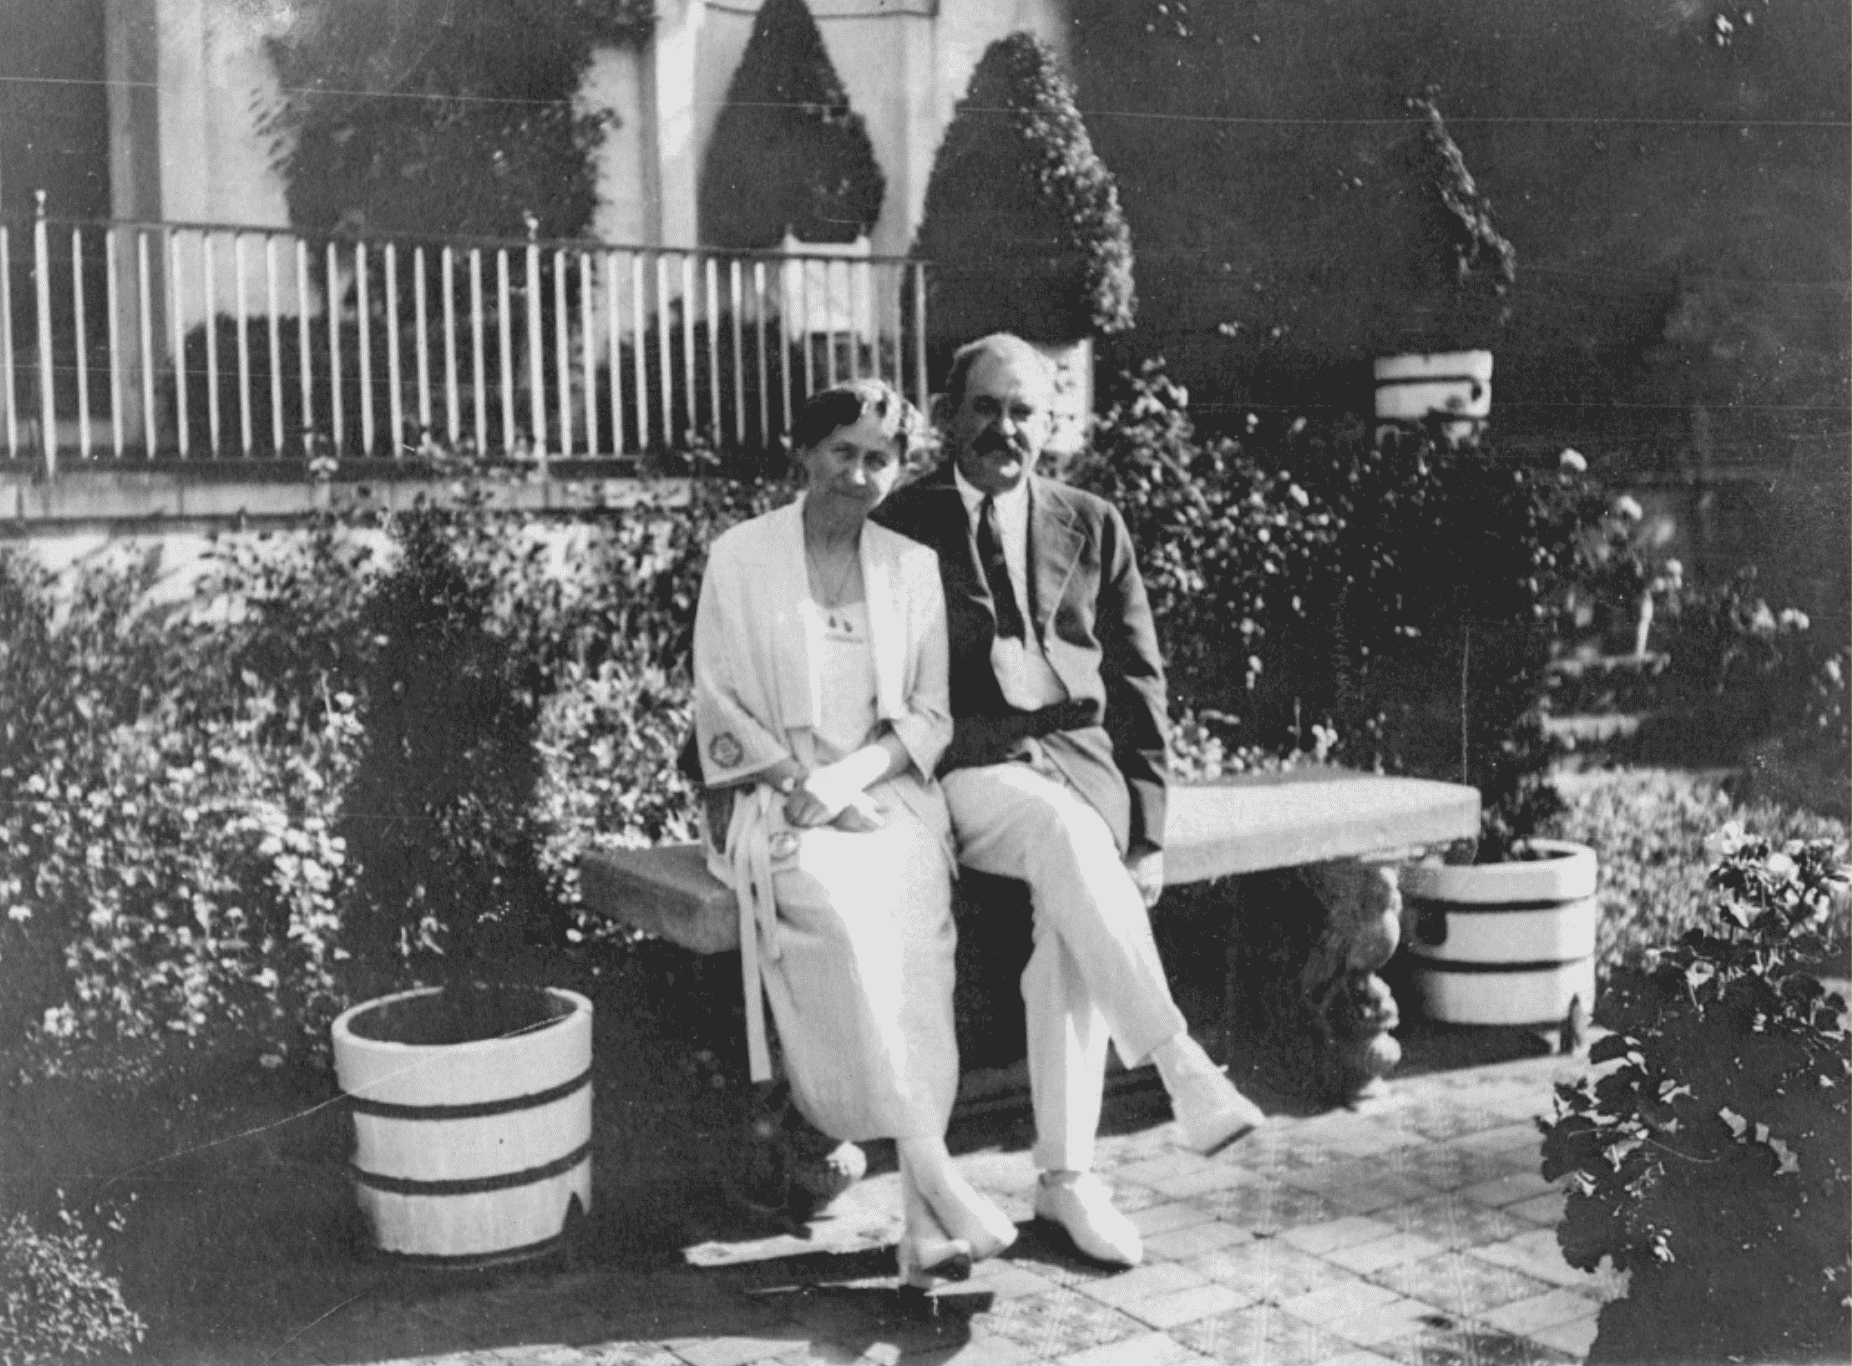 An old photo of a man and woman sitting on a bench.